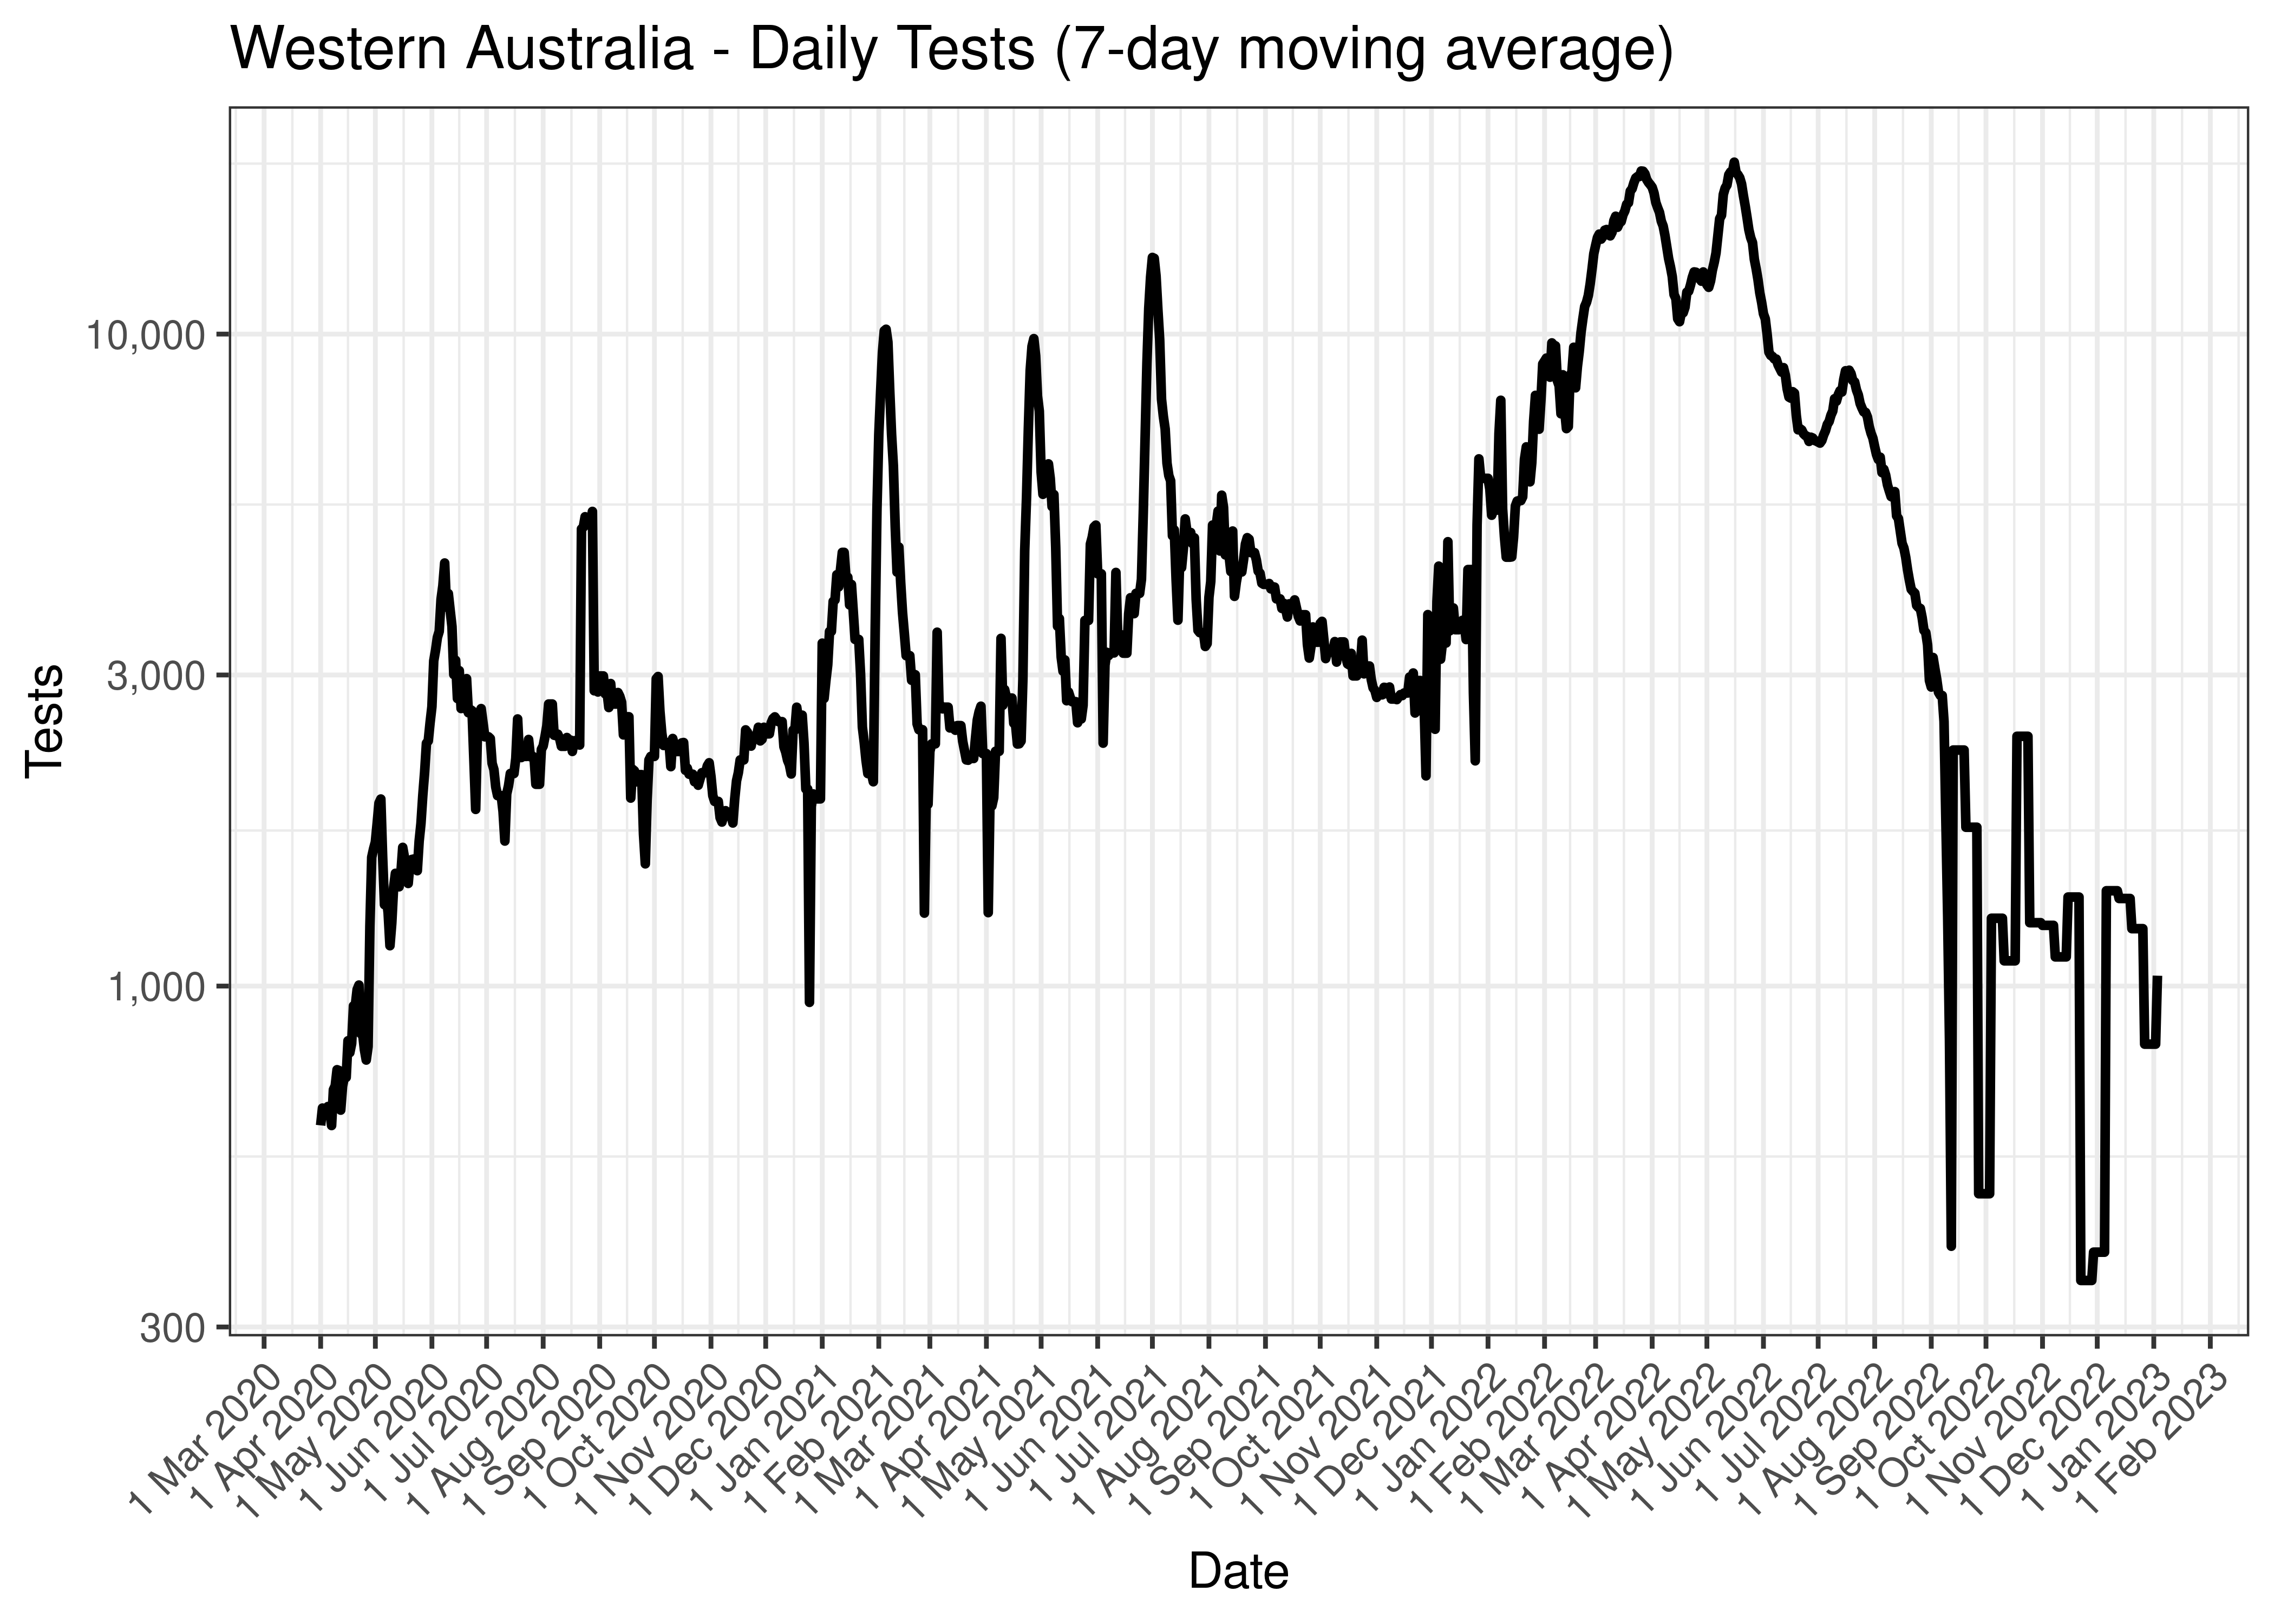 Victoria - Daily ICU Counts (7-day moving average)